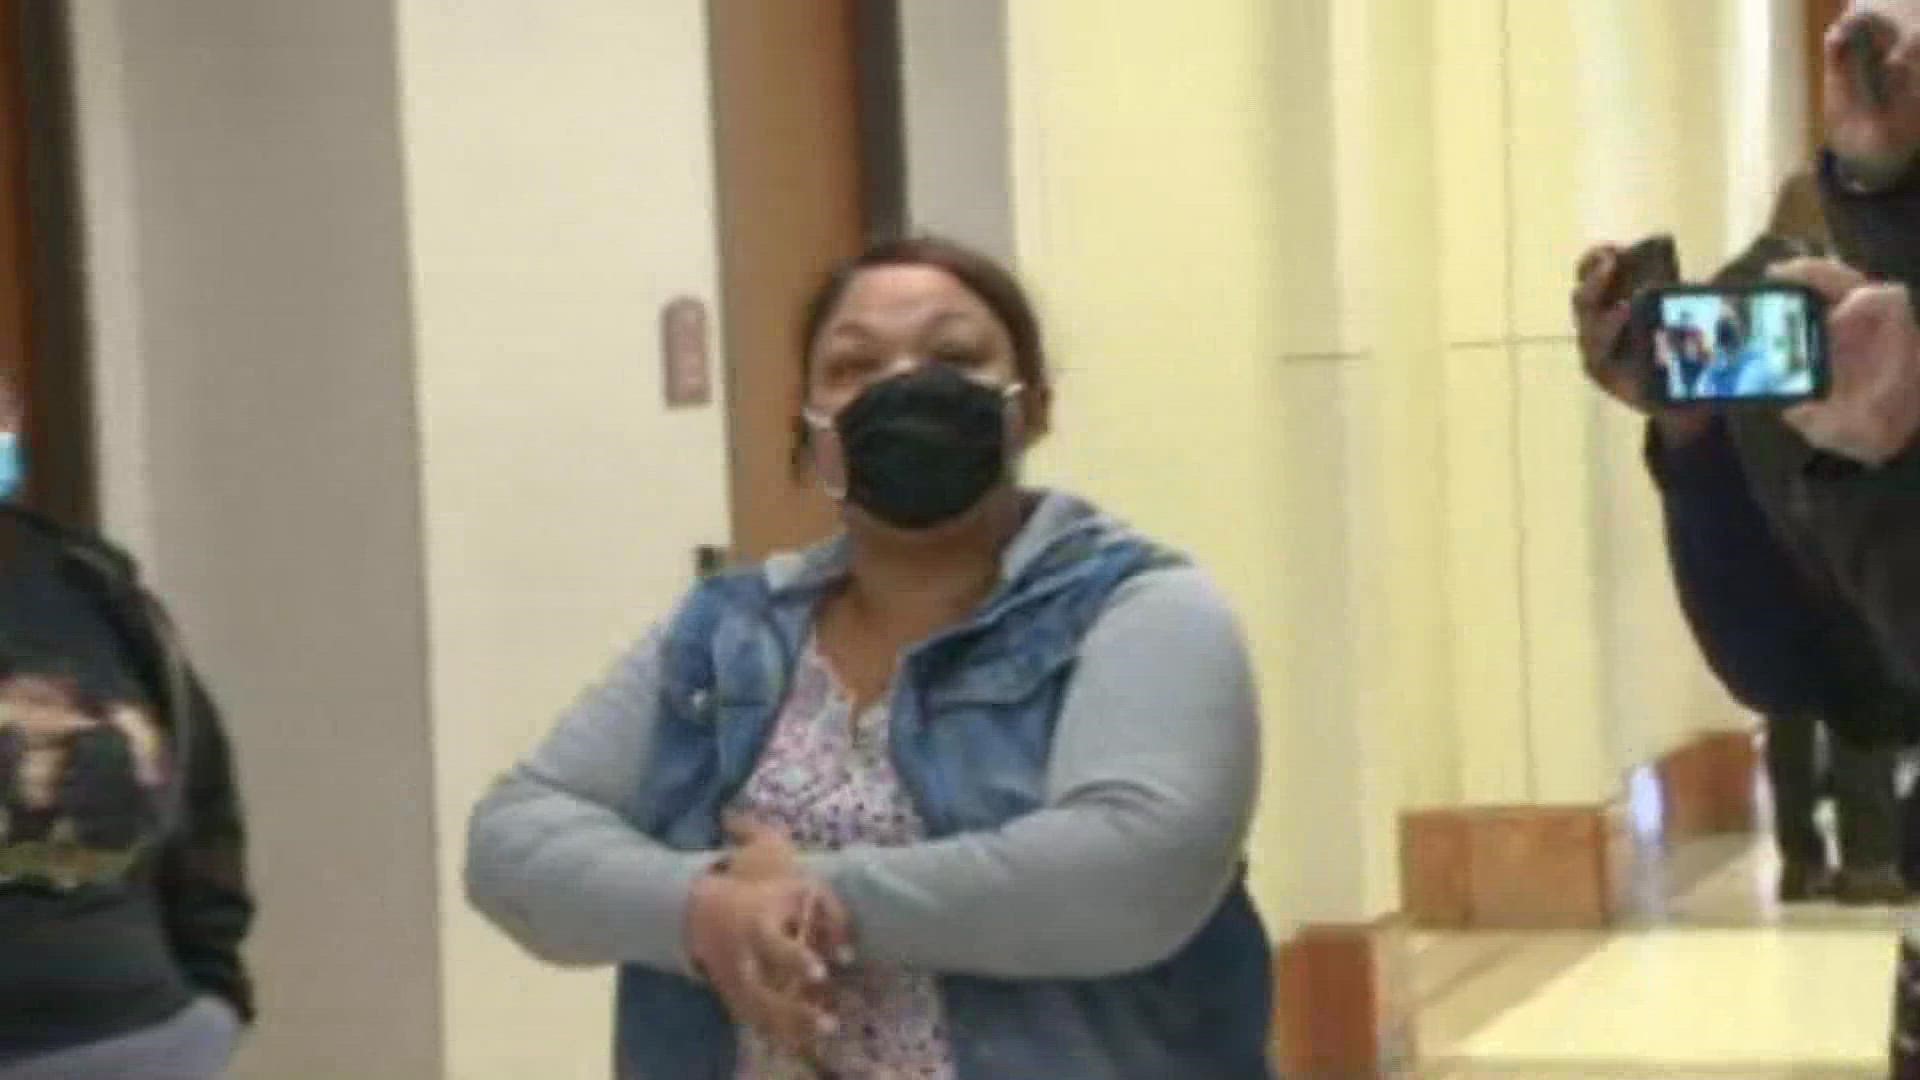 Spring woman charged with child abandonment ordered to undergo mental health evaluation khou